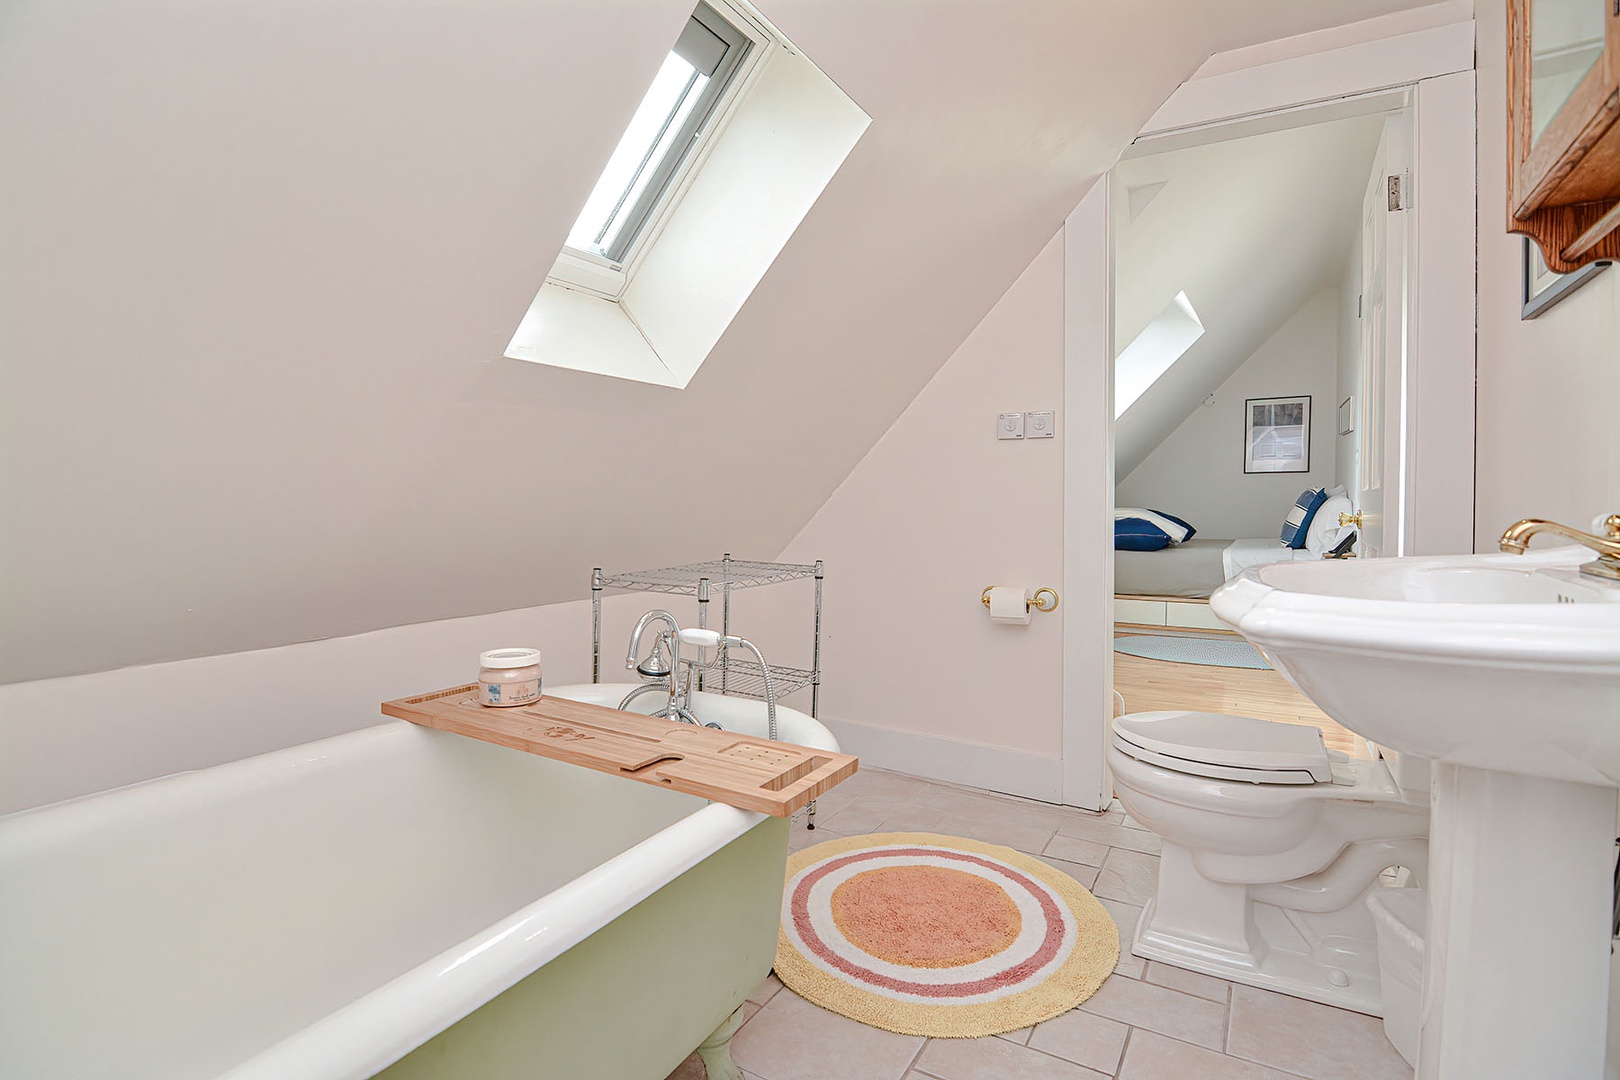 This full bath is ensuite to the full bedroom.